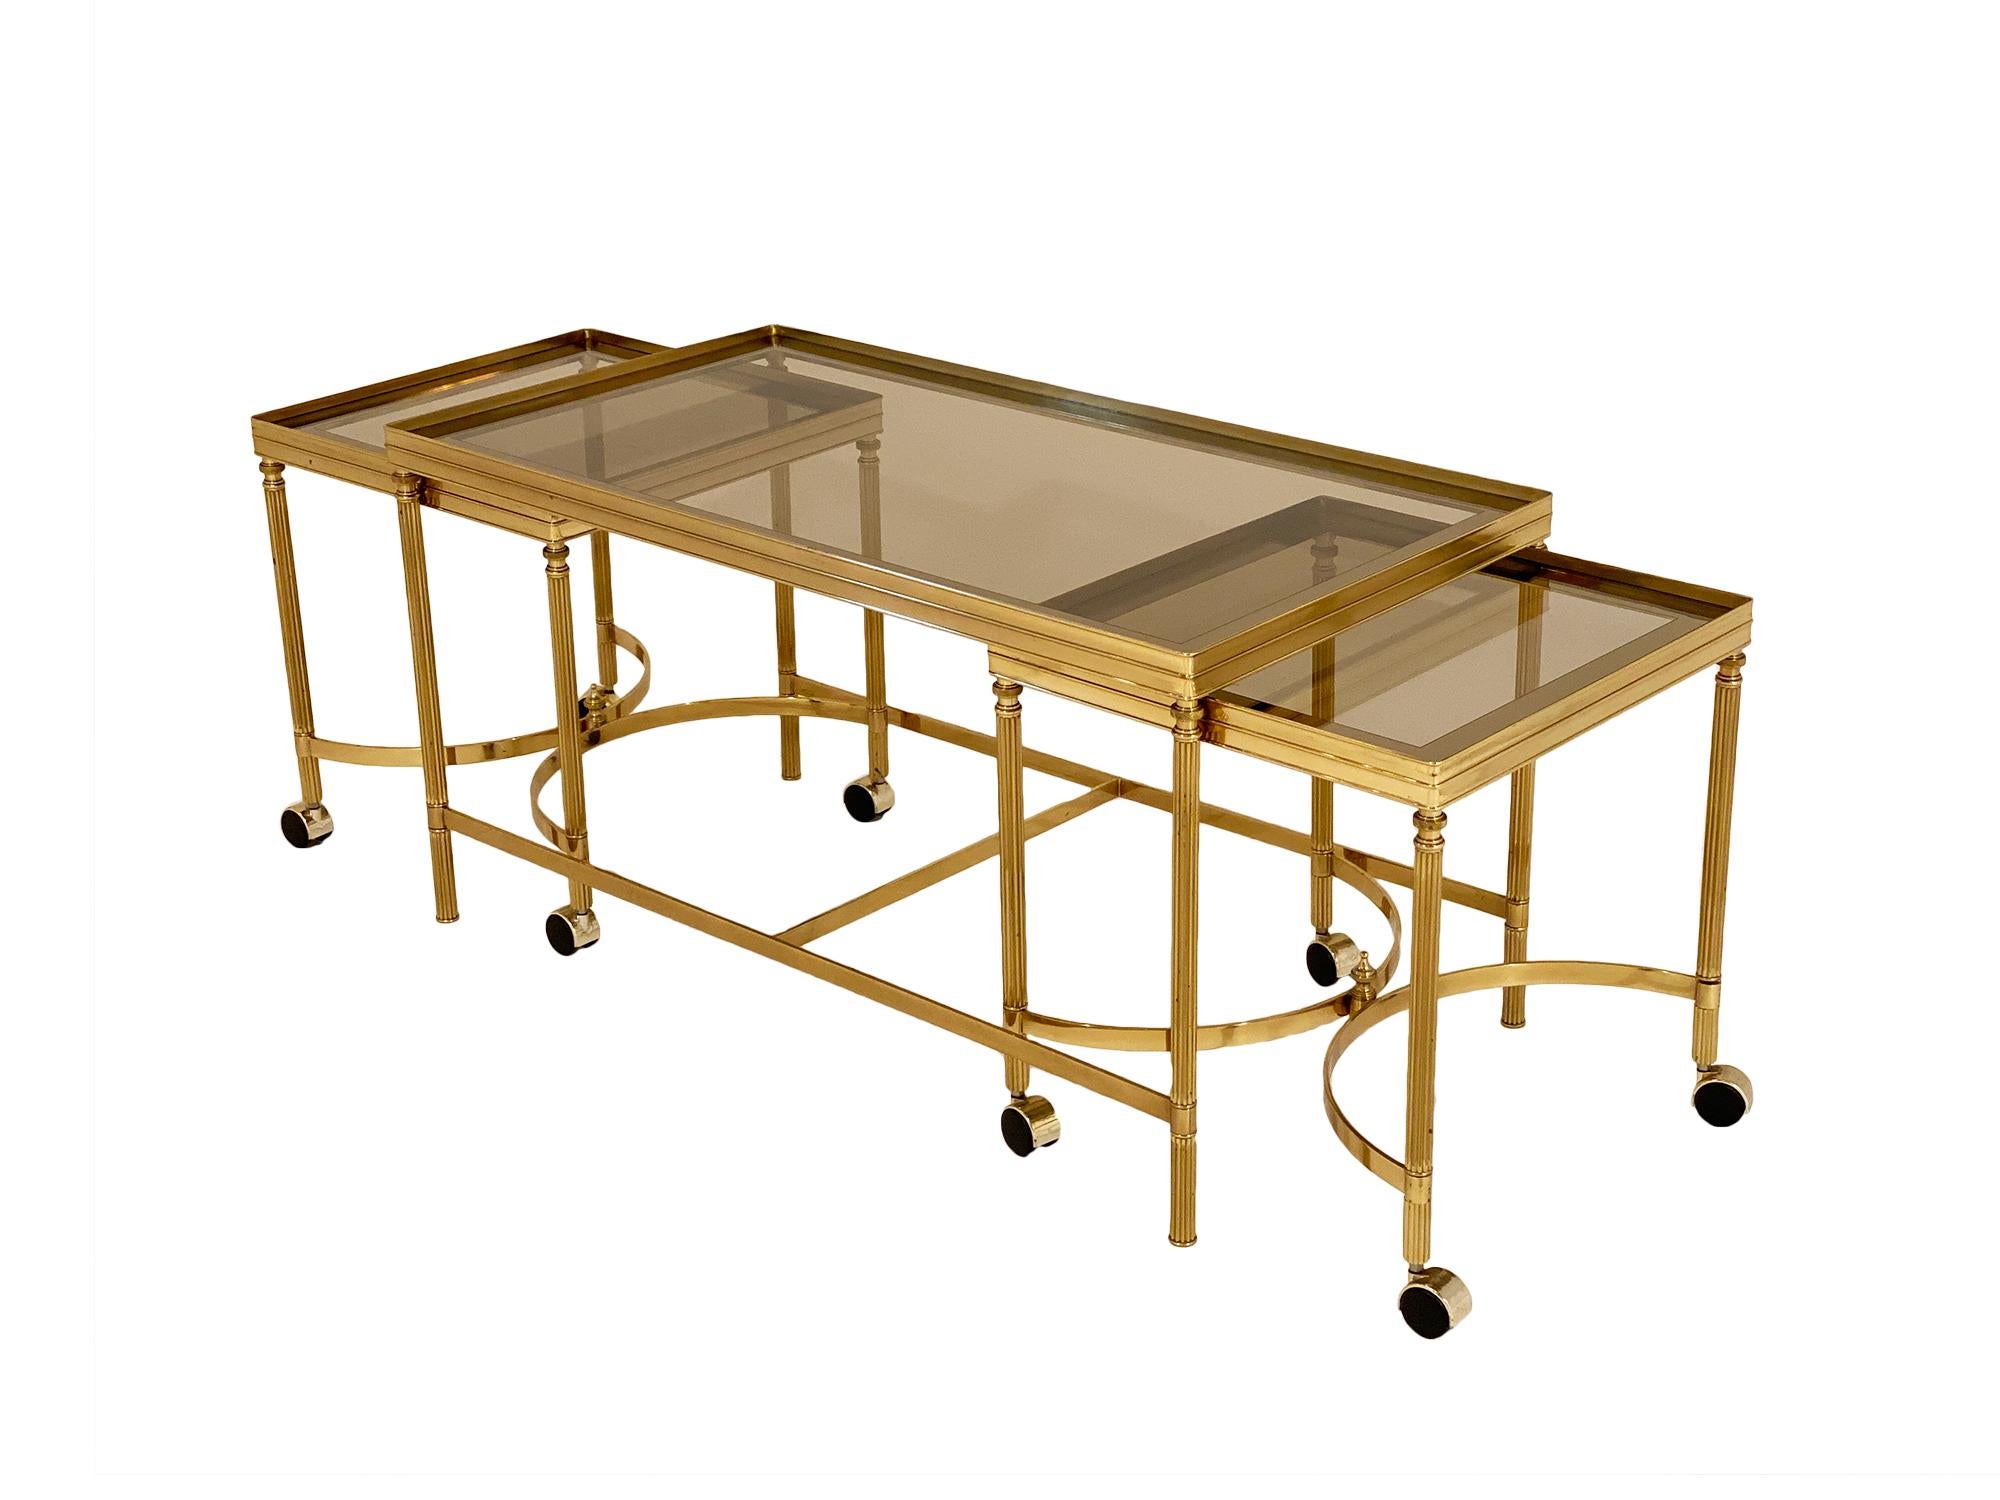 Maison Jansen nesting coffee table set from France. Made of brass with lightly smoked glass; this set by the iconic Parisian company Maison Jansen has classic details and beautiful quality. The main table has an H stretcher and two side tables on